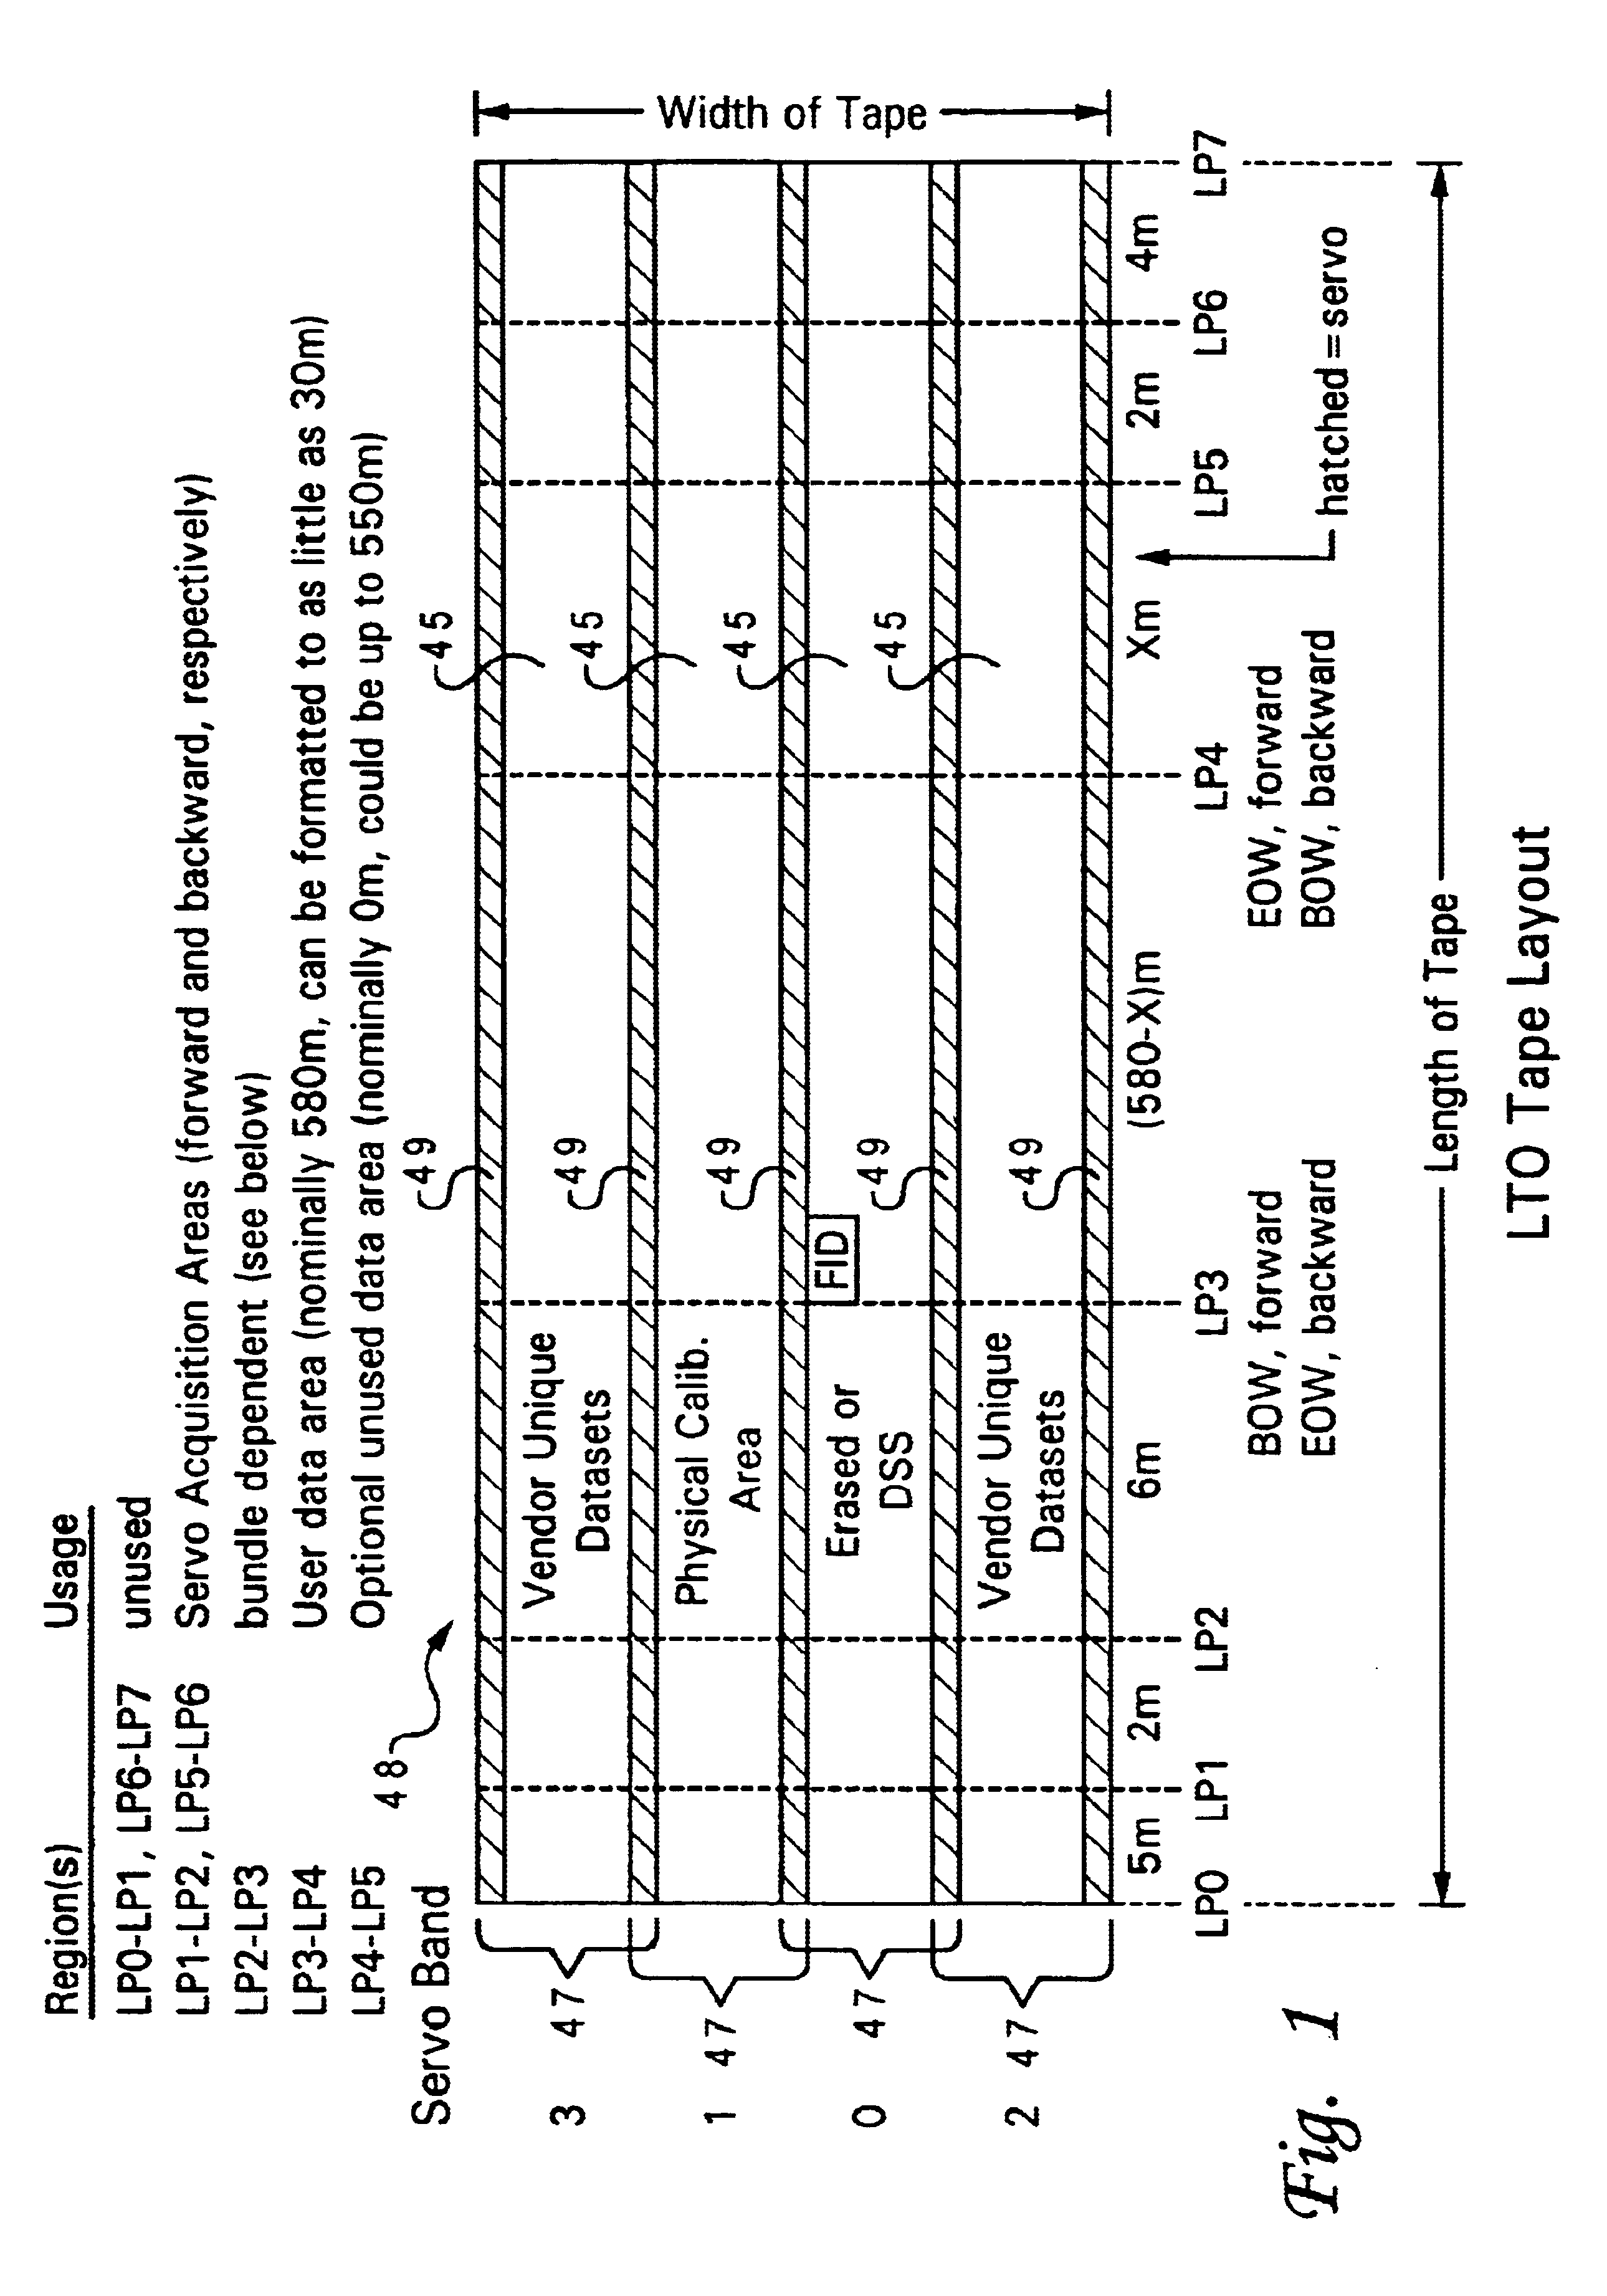 Tape transport servo system and method for a computer tape drive